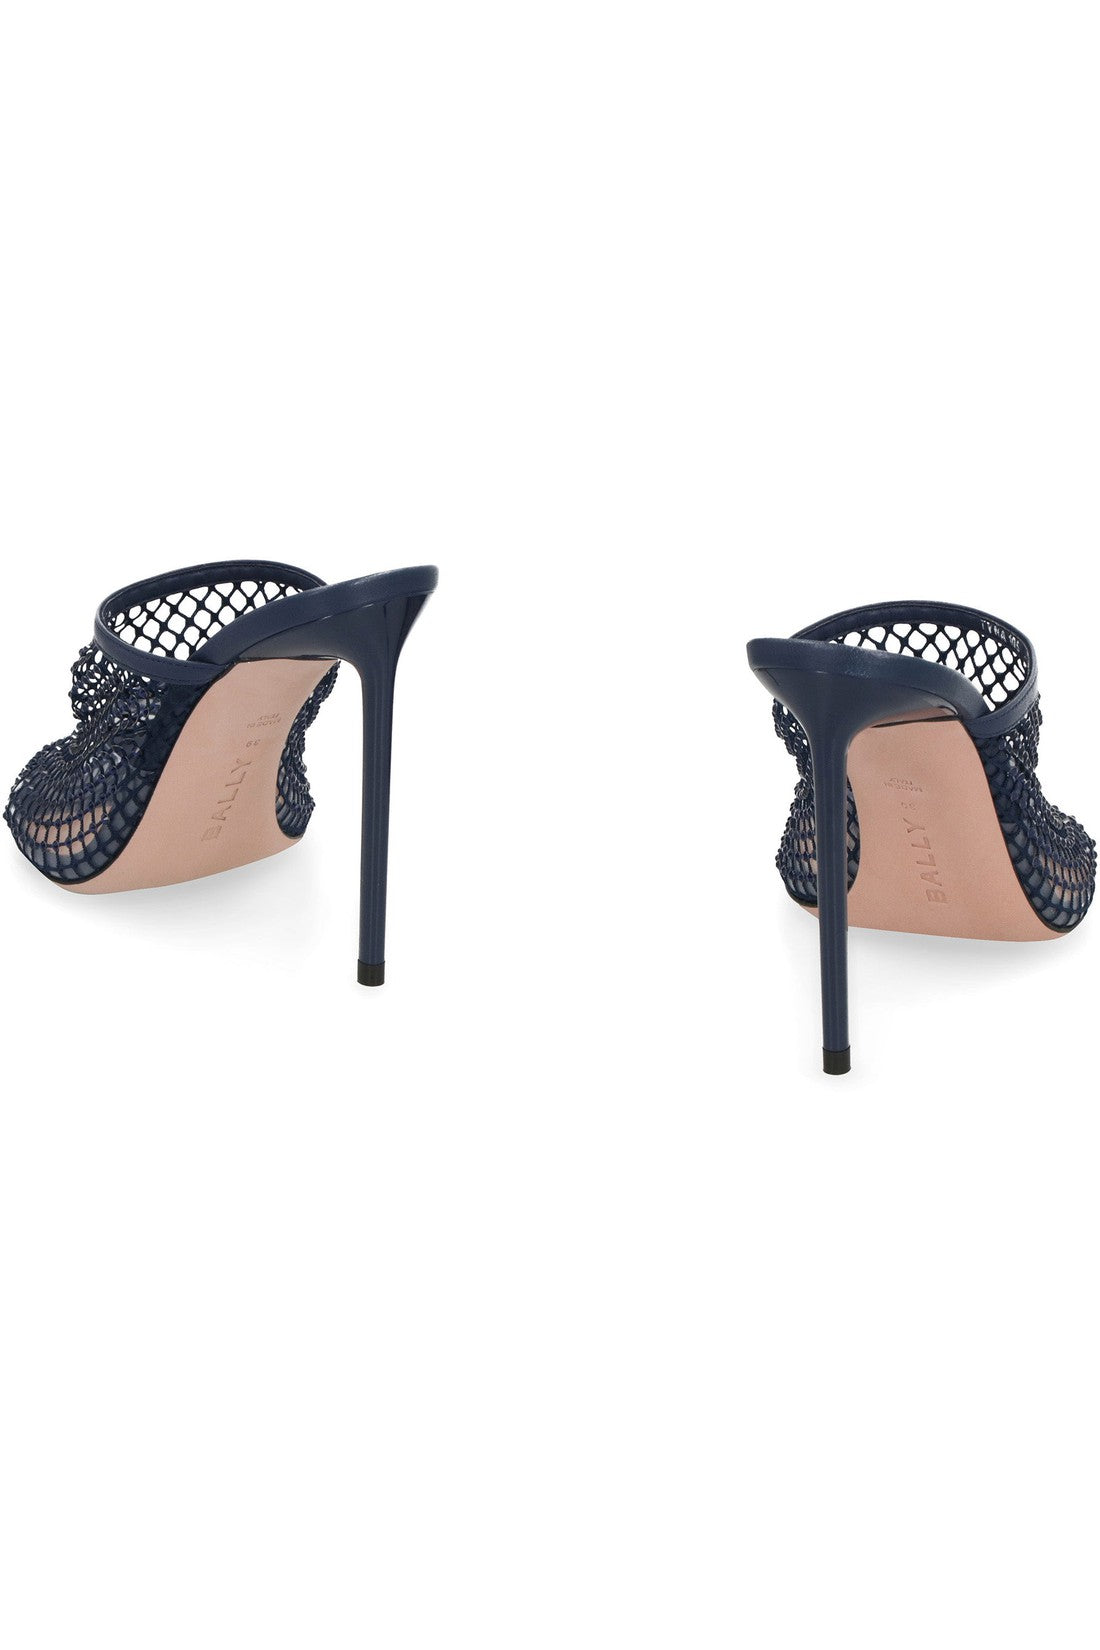 Bally-OUTLET-SALE-Crystal Fishnet leather mules-ARCHIVIST